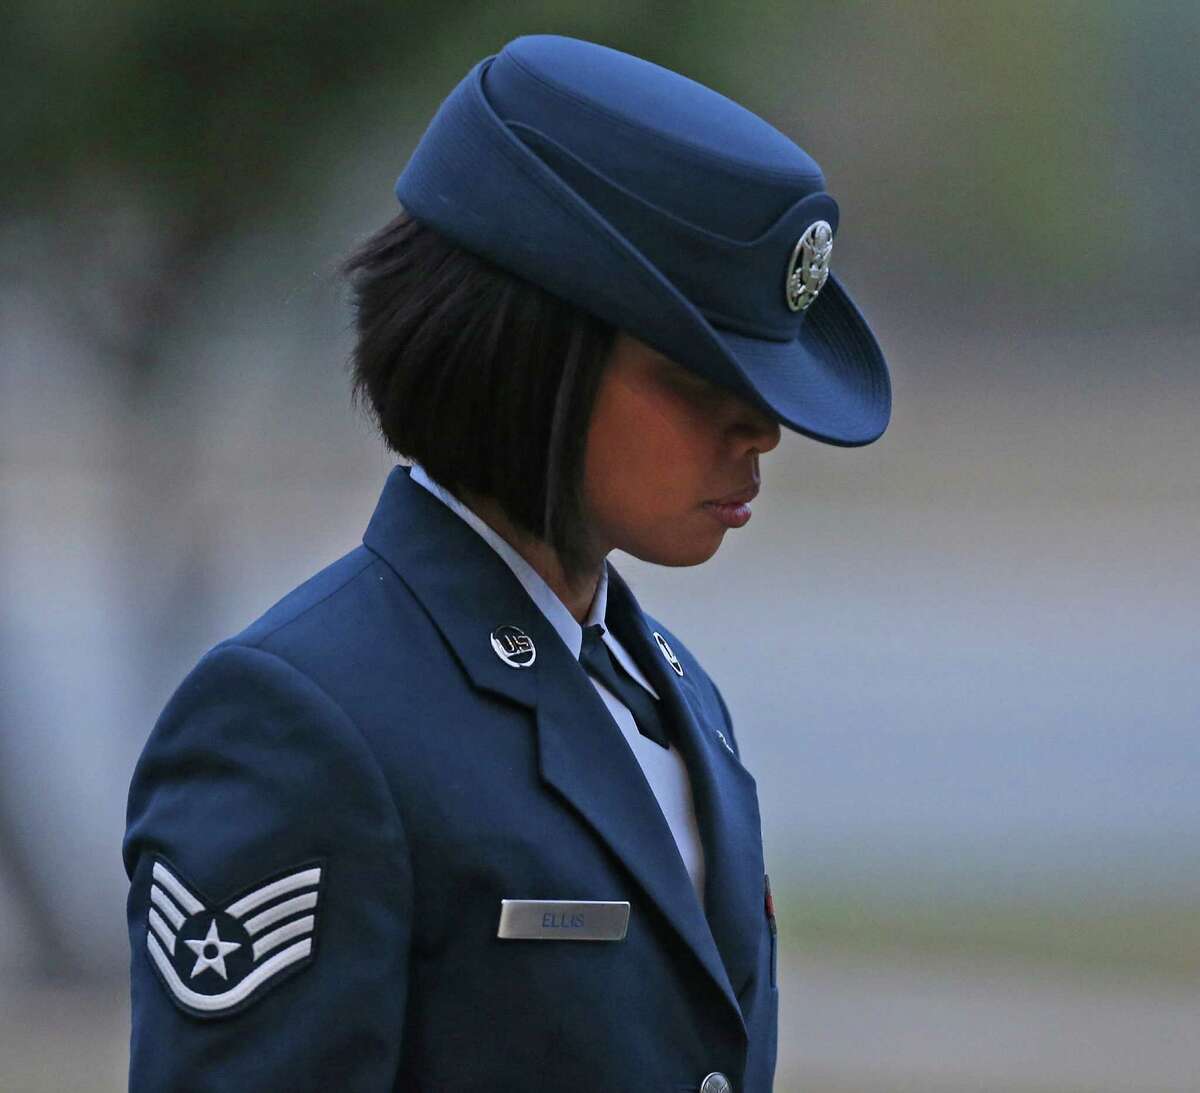 U.S. Air Force Staff Sgt. Annamarie Ellis arrives at Lackland Air Force Base for her trial on malt raining and maltreating basic trainees charges, Monday, March 24, 2014.